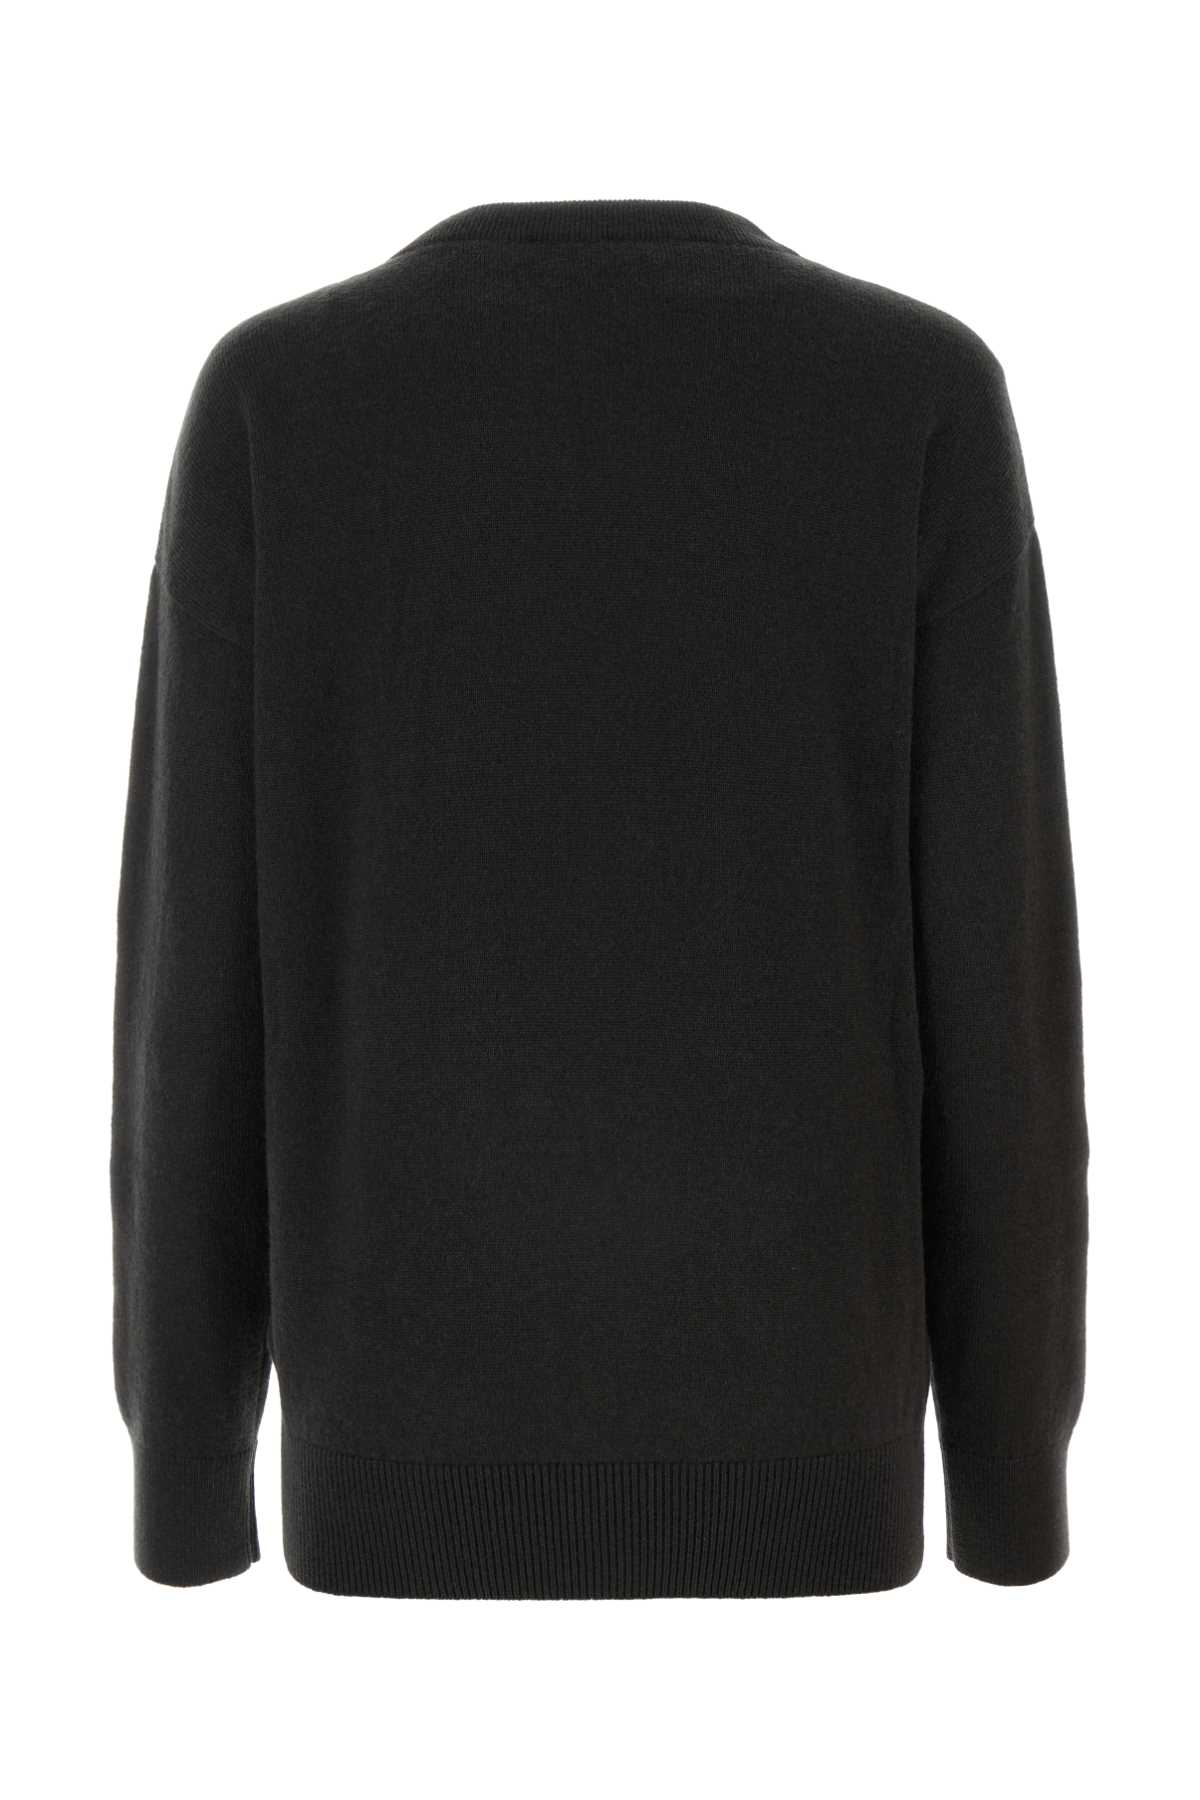 Burberry Anthracite Cashmere Jumper In Onyx